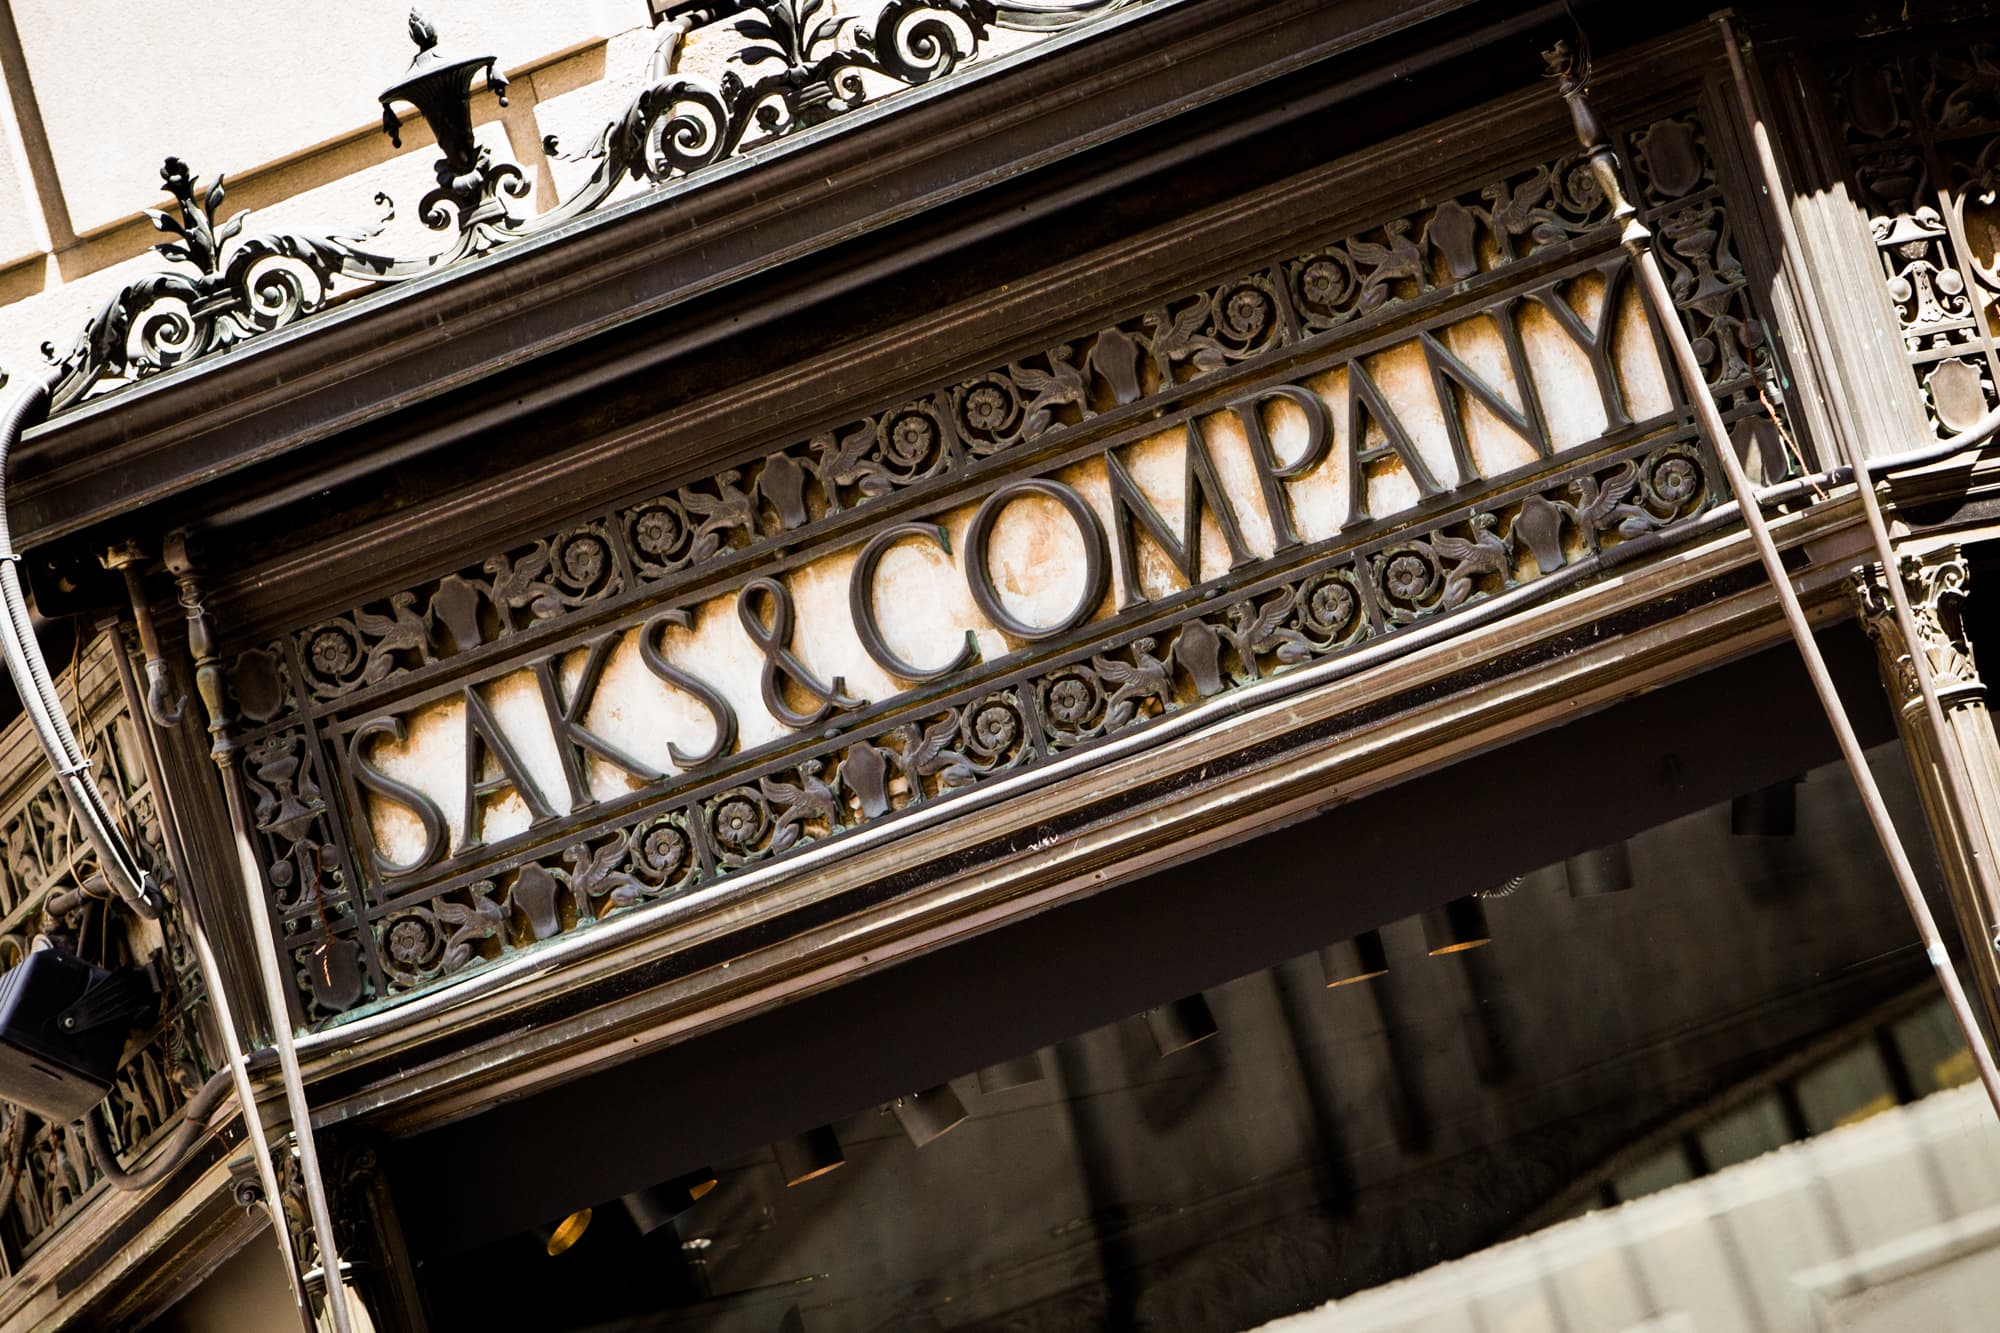 Saks Takes Back Fifth Avenue